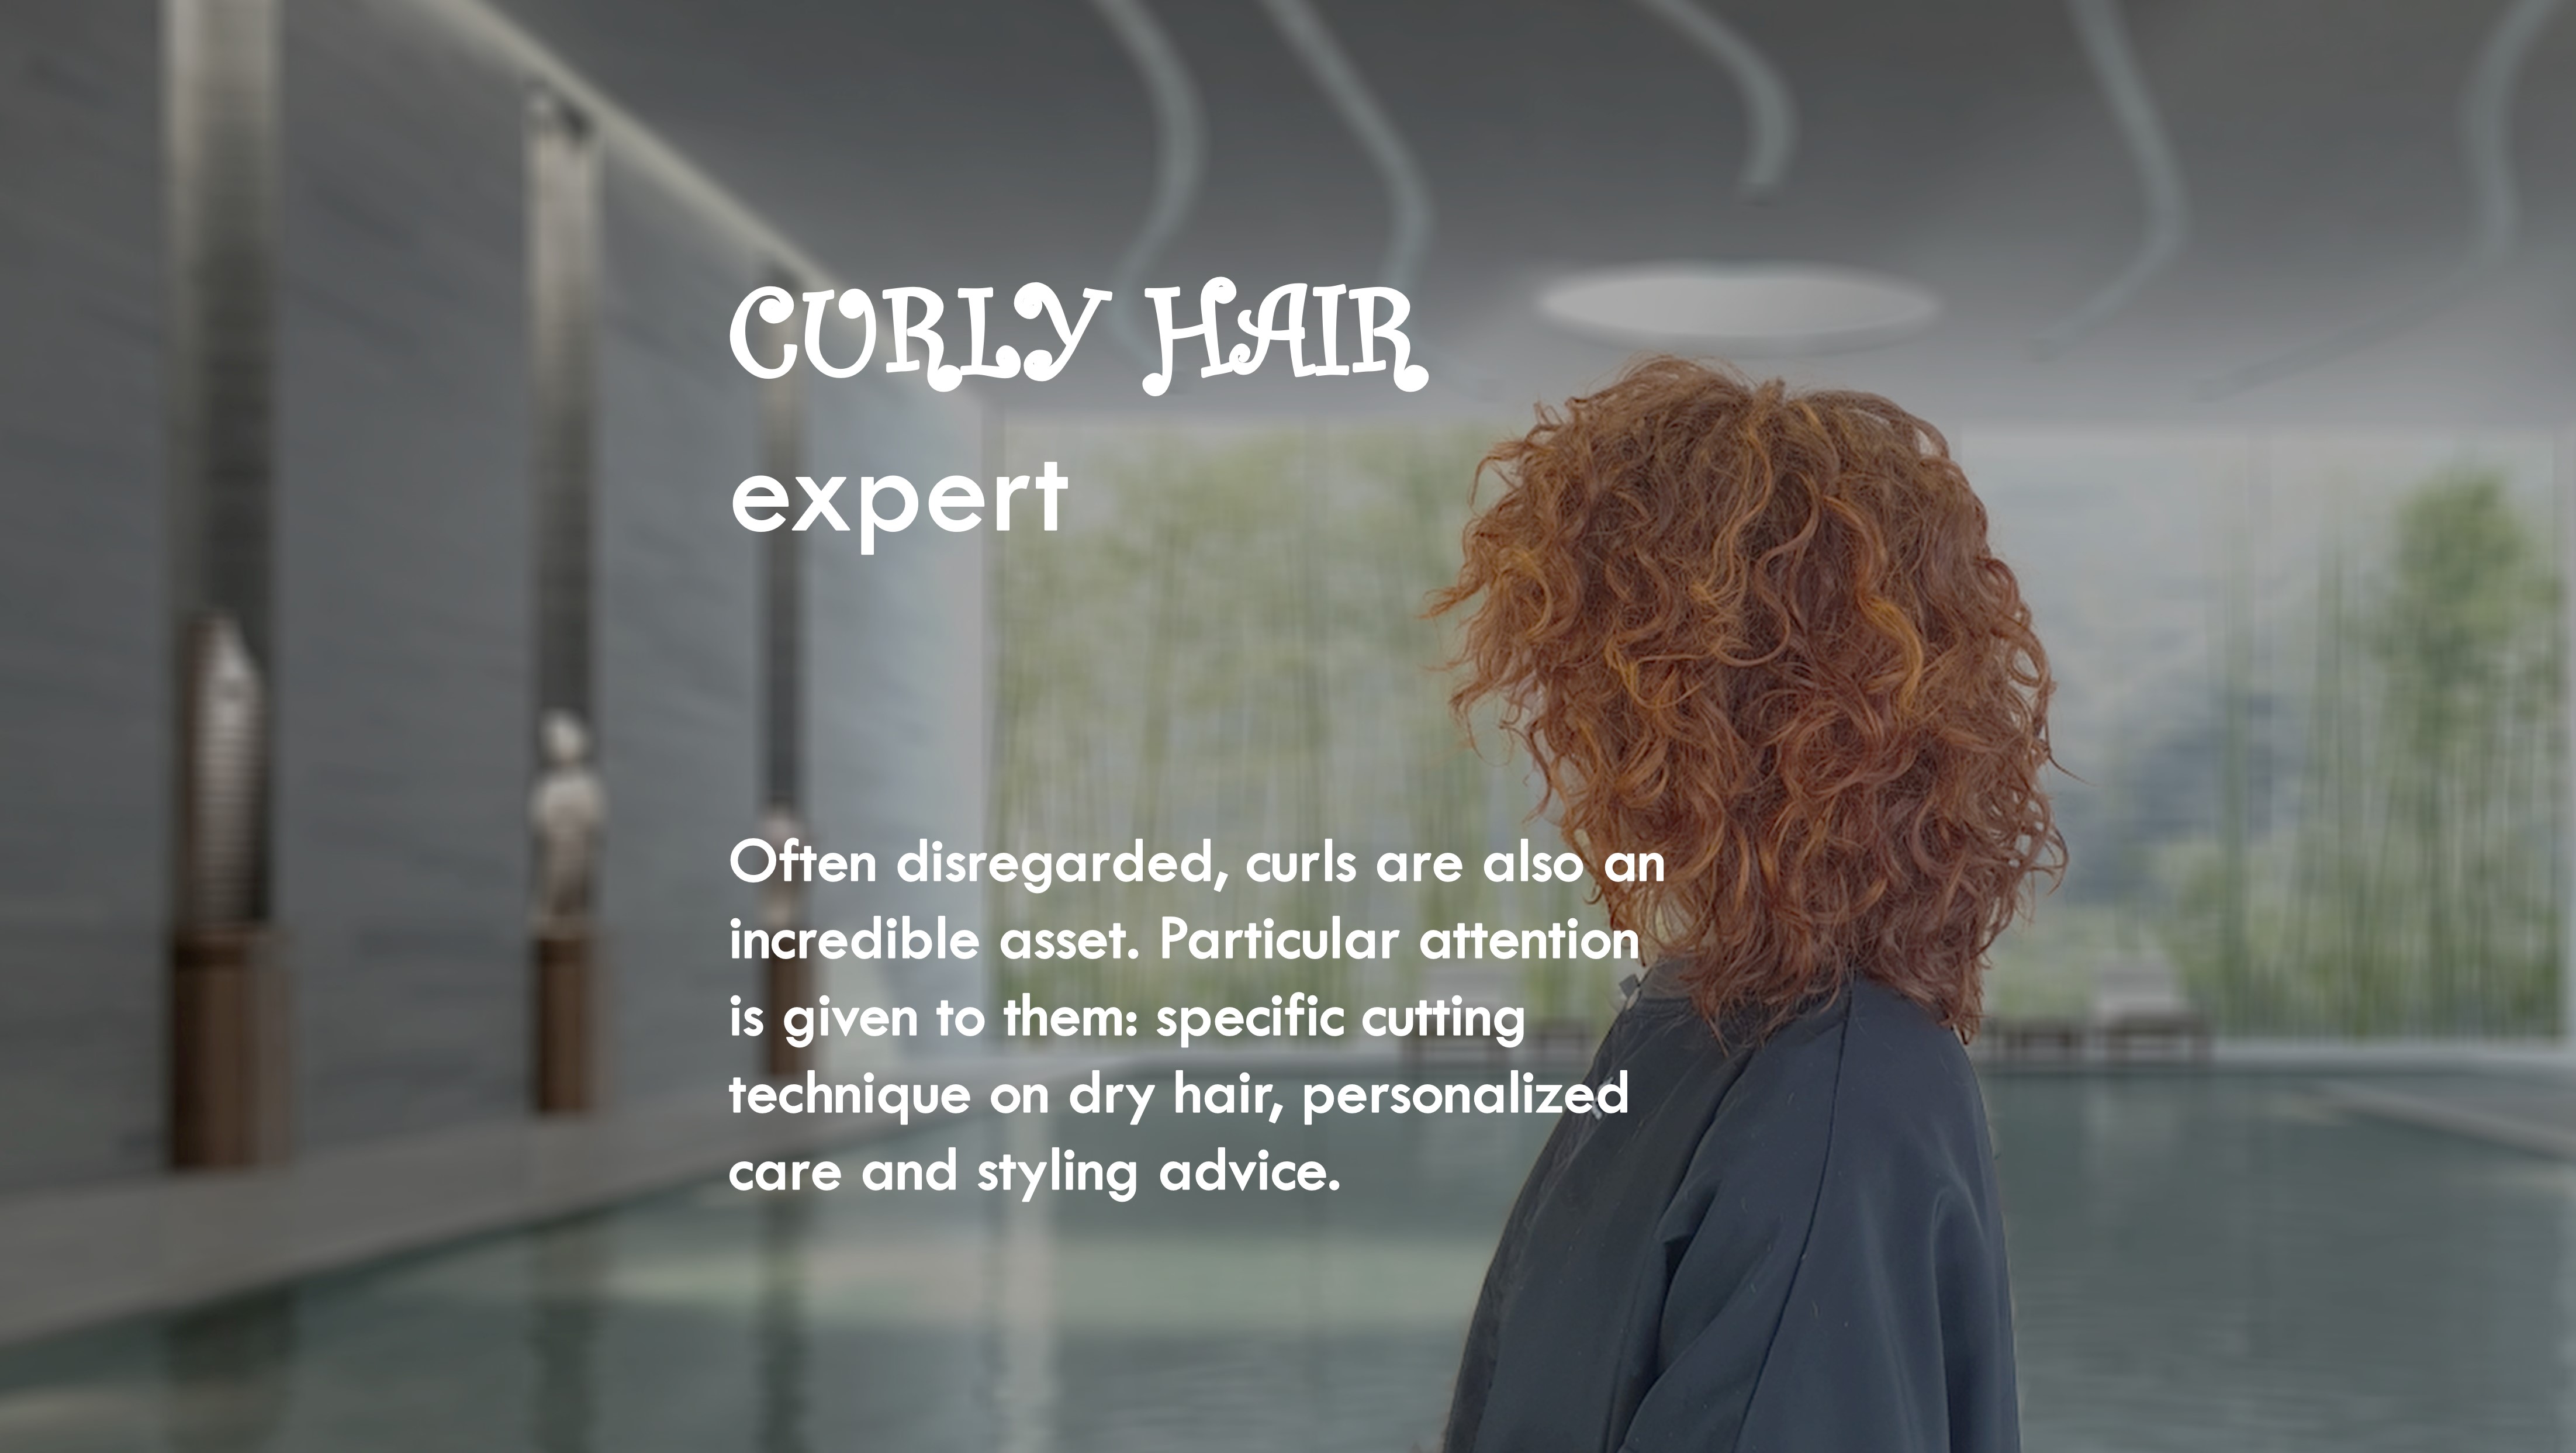 Hairdresser expert in curly hair in Roanne at the Maison Patrick Sérole hair salon